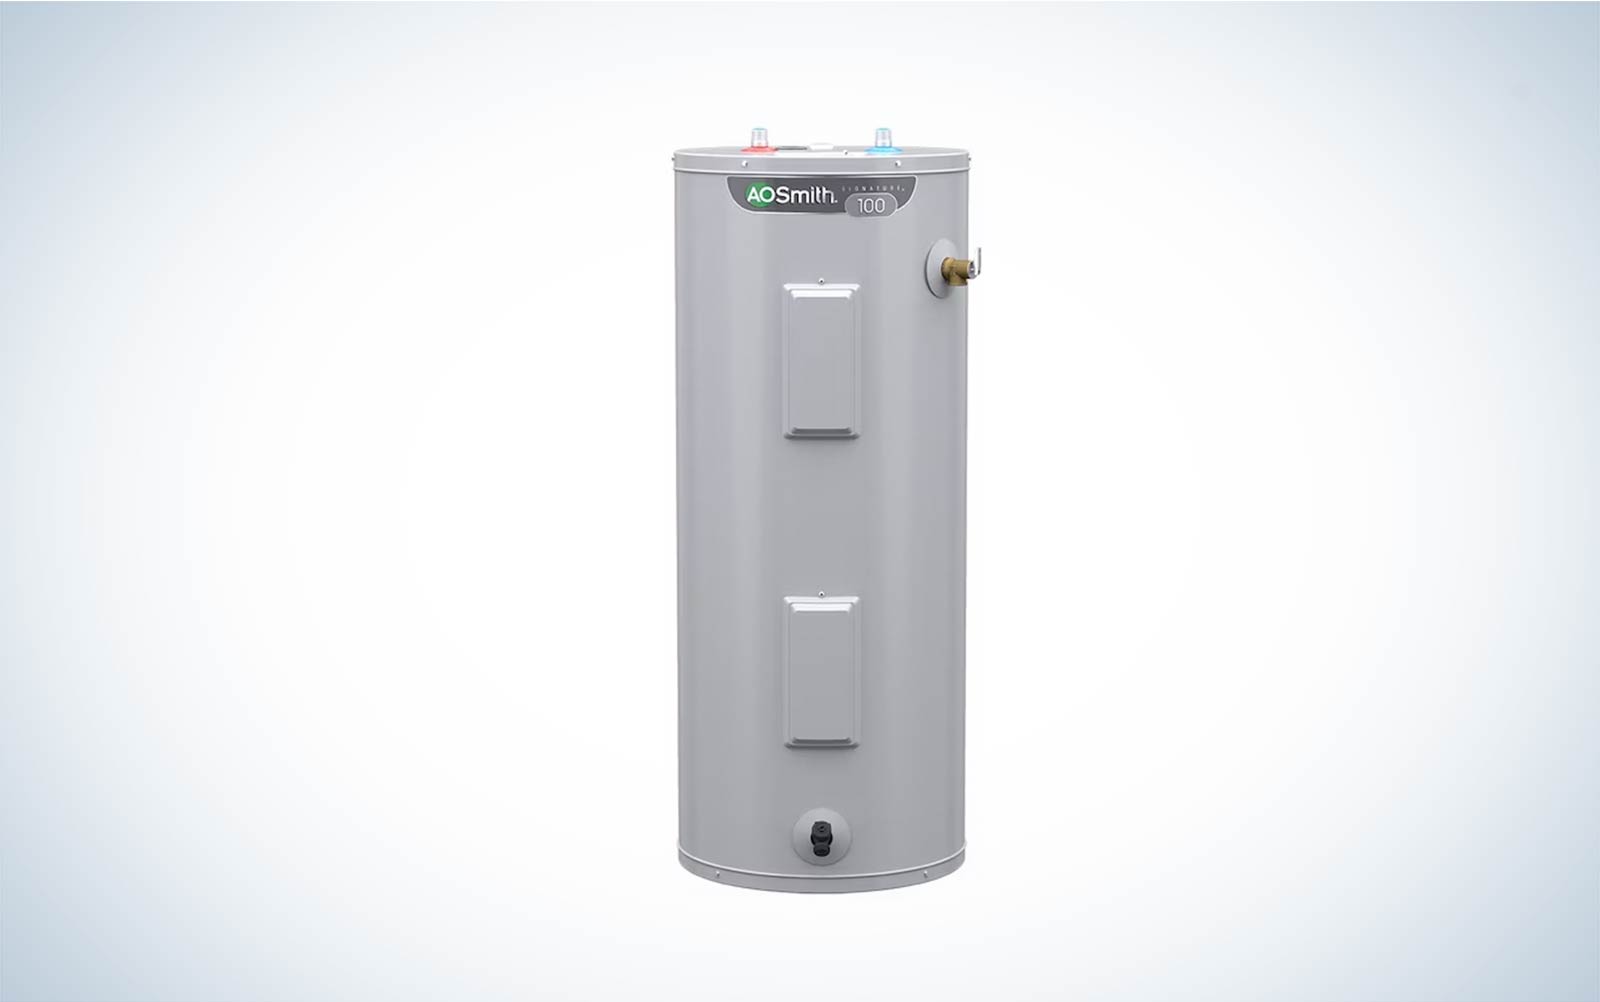 The History Of Water Heaters. Heating water has been an